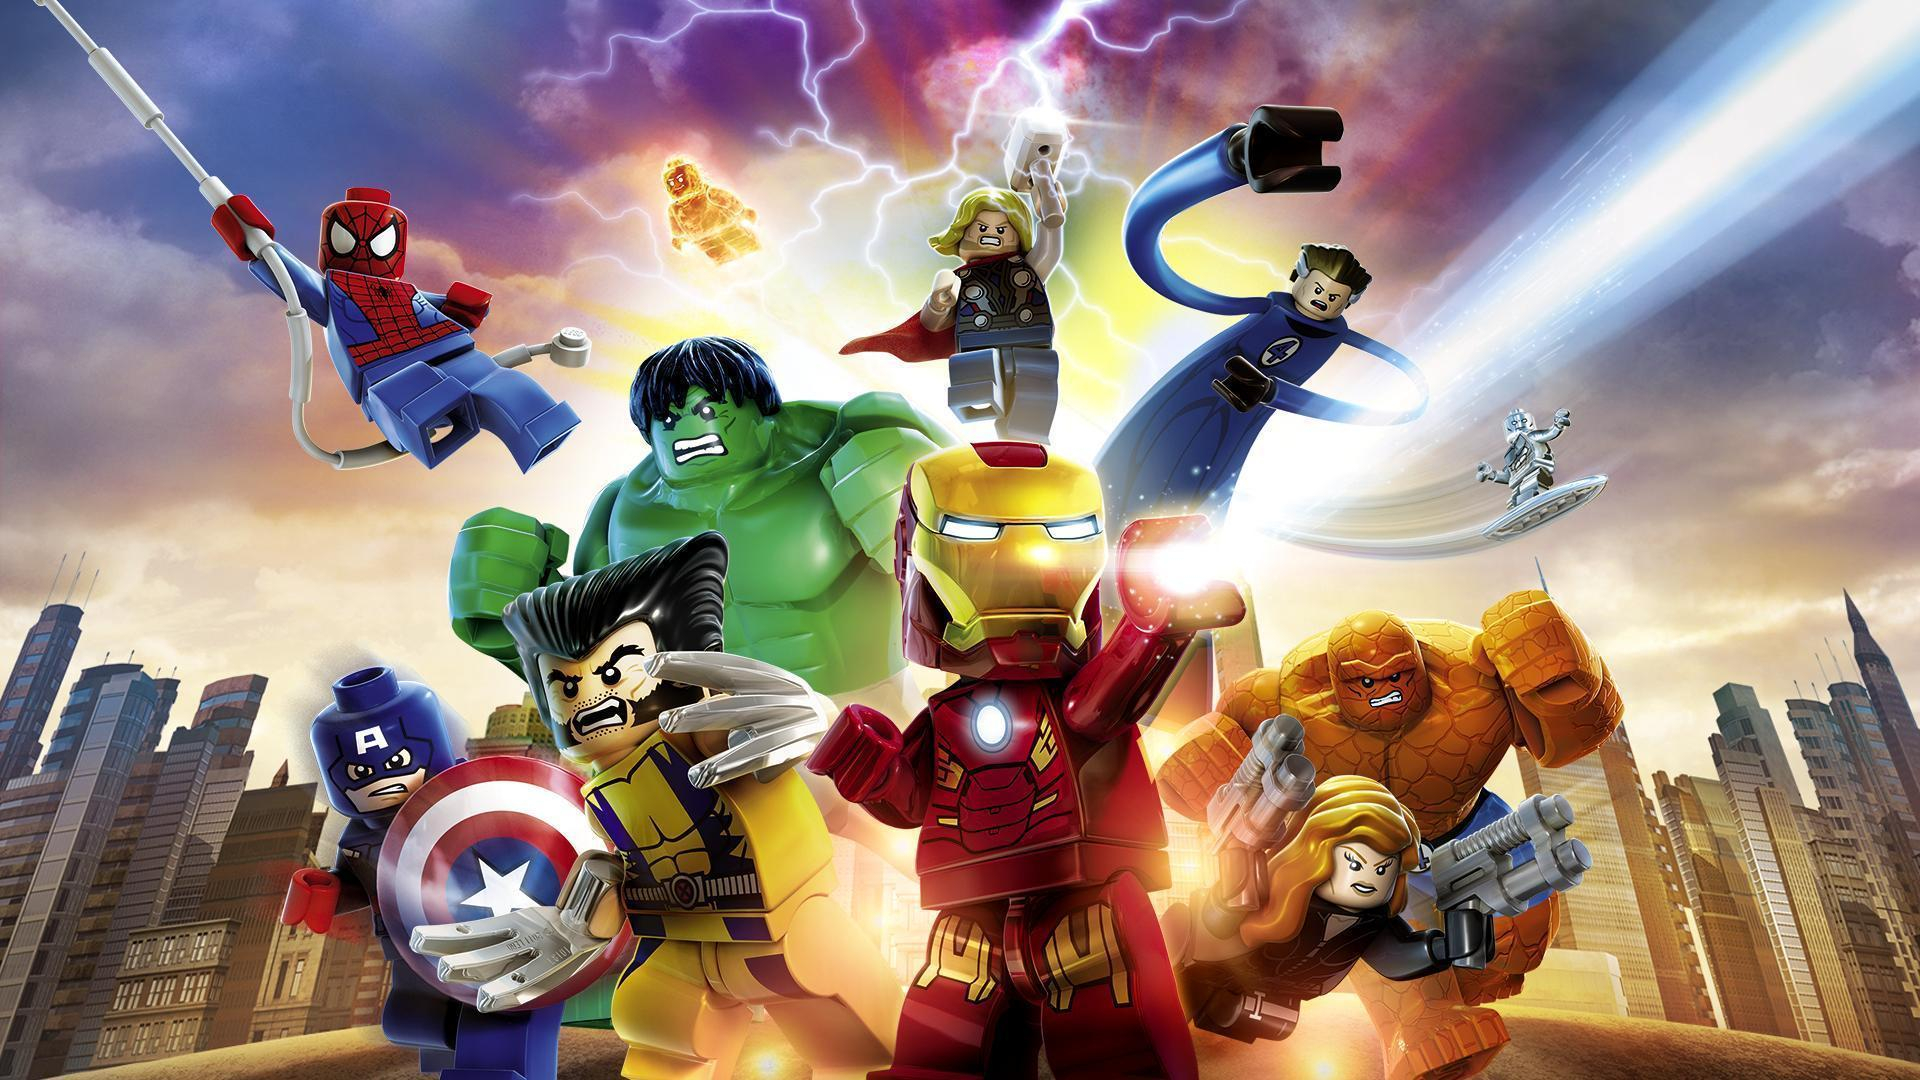 1920x1080 LEGO Marvel Super Heroes Wallpapers Top Free LEGO Marvel Super Heroes Backgrounds